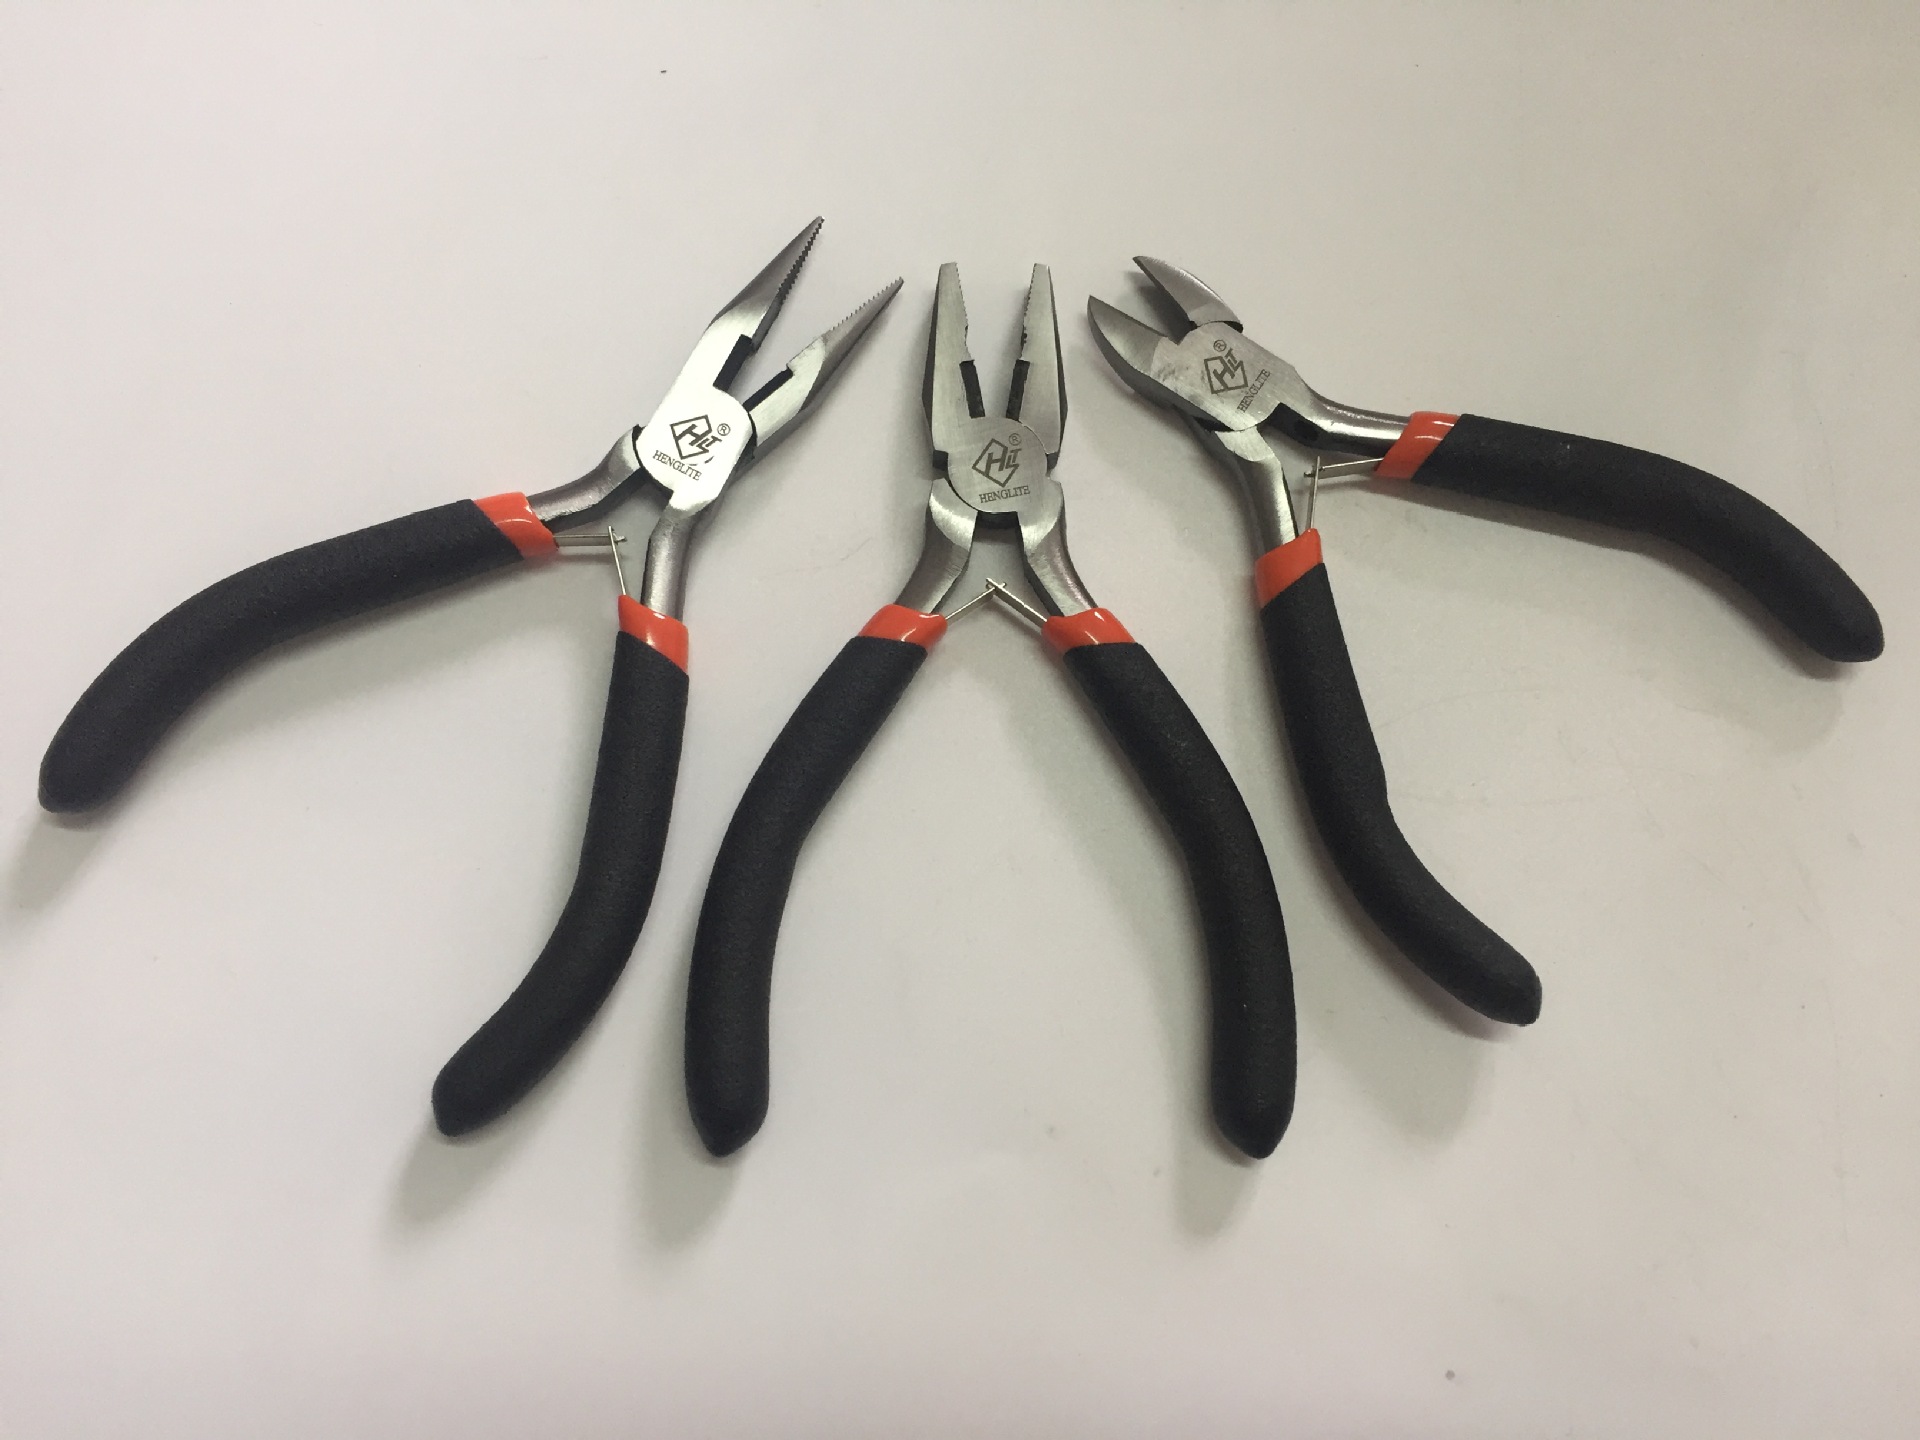 4.5 Inch 125mm Needle-nose Mini Pliers